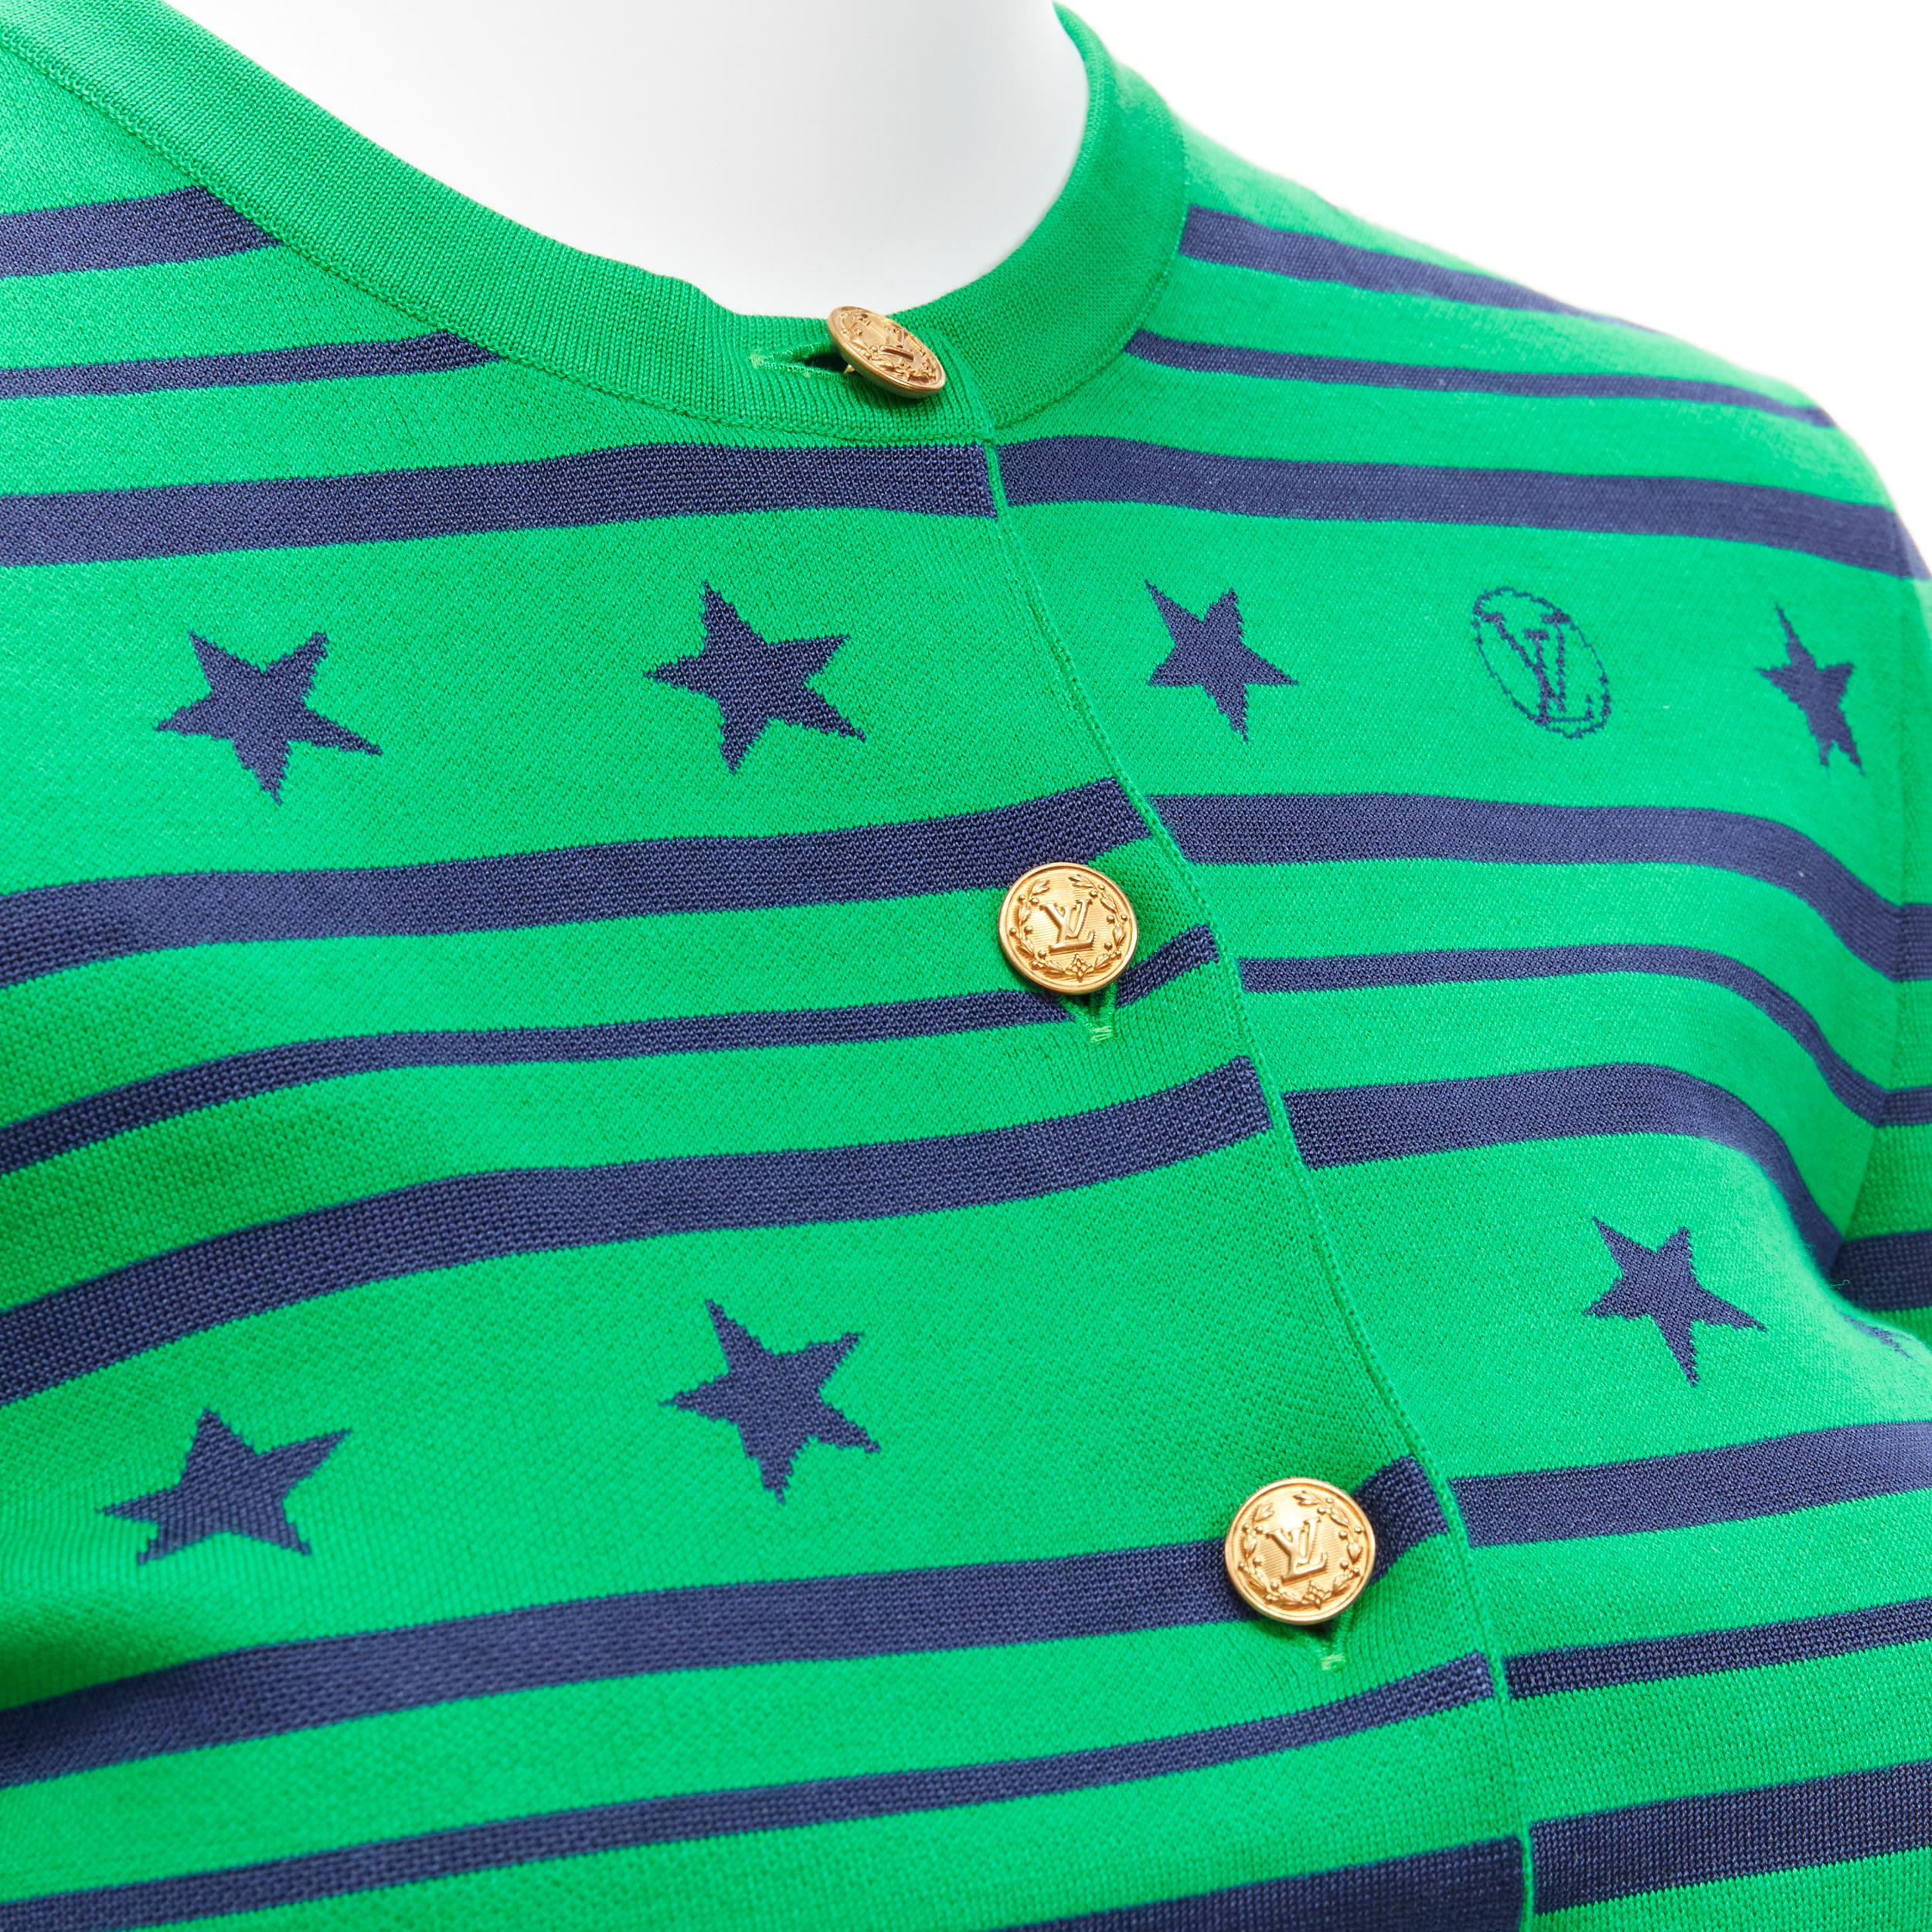 LOUIS VUITTON green cotton silk star logo striped cropped cardigan XS
Reference: AAWC/A00461
Brand: Louis Vuitton
Designer: Nicolas Ghesquiere
Material: Cotton, Silk, Blend
Color: Green, Blue
Pattern: Striped
Closure: Button
Extra Details: Gold-tone